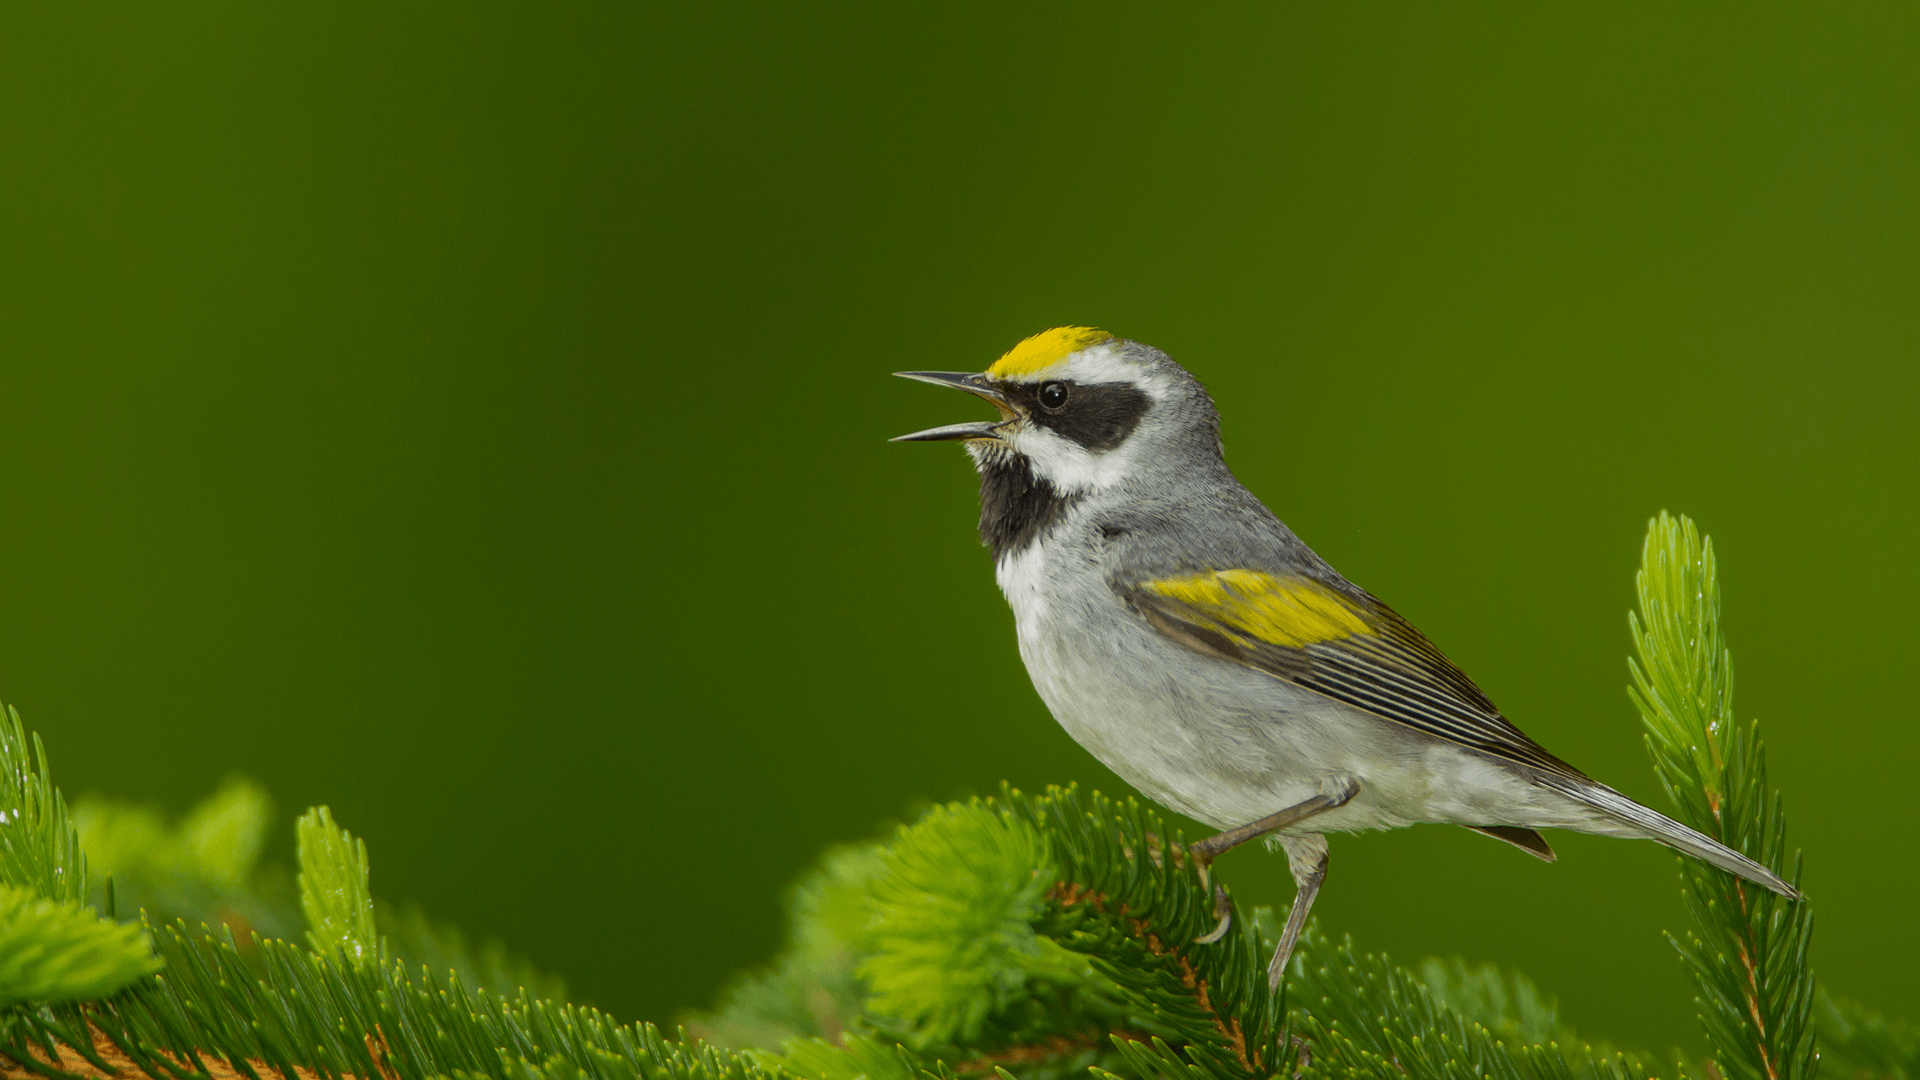 A small songbird perches on a leafy green branch